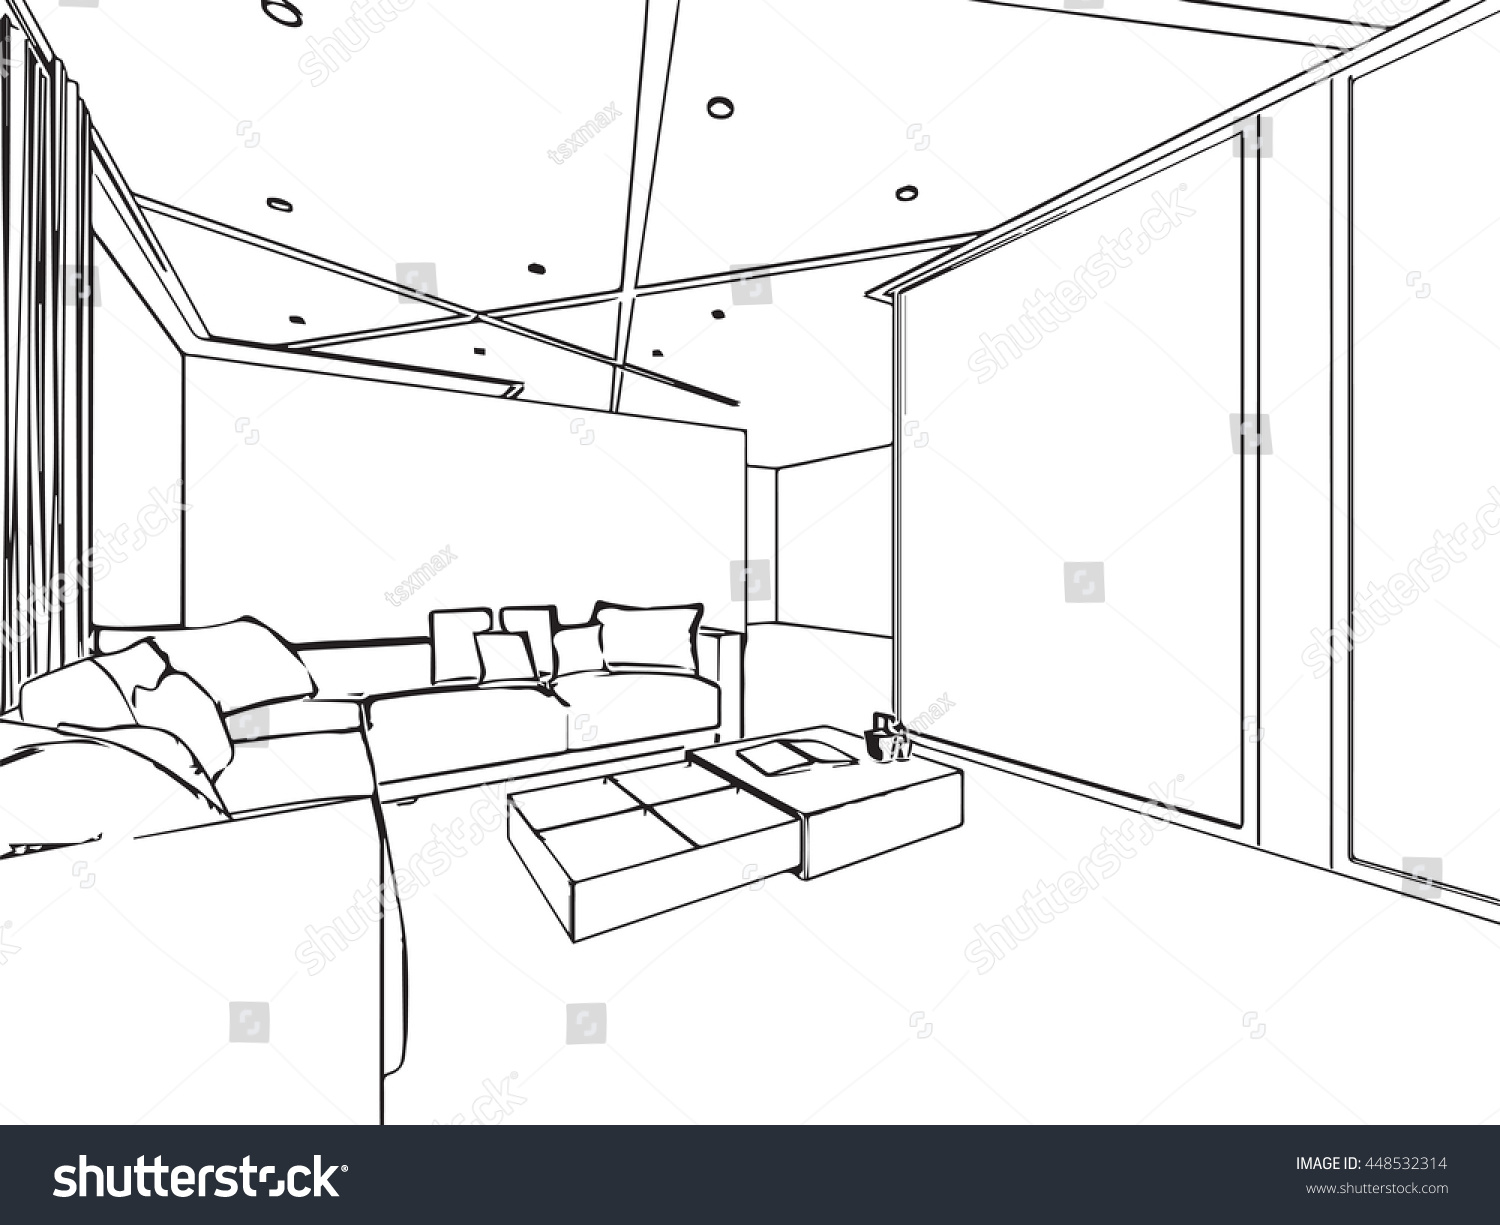 Outline Sketch Drawing Perspective Interior Space Stock